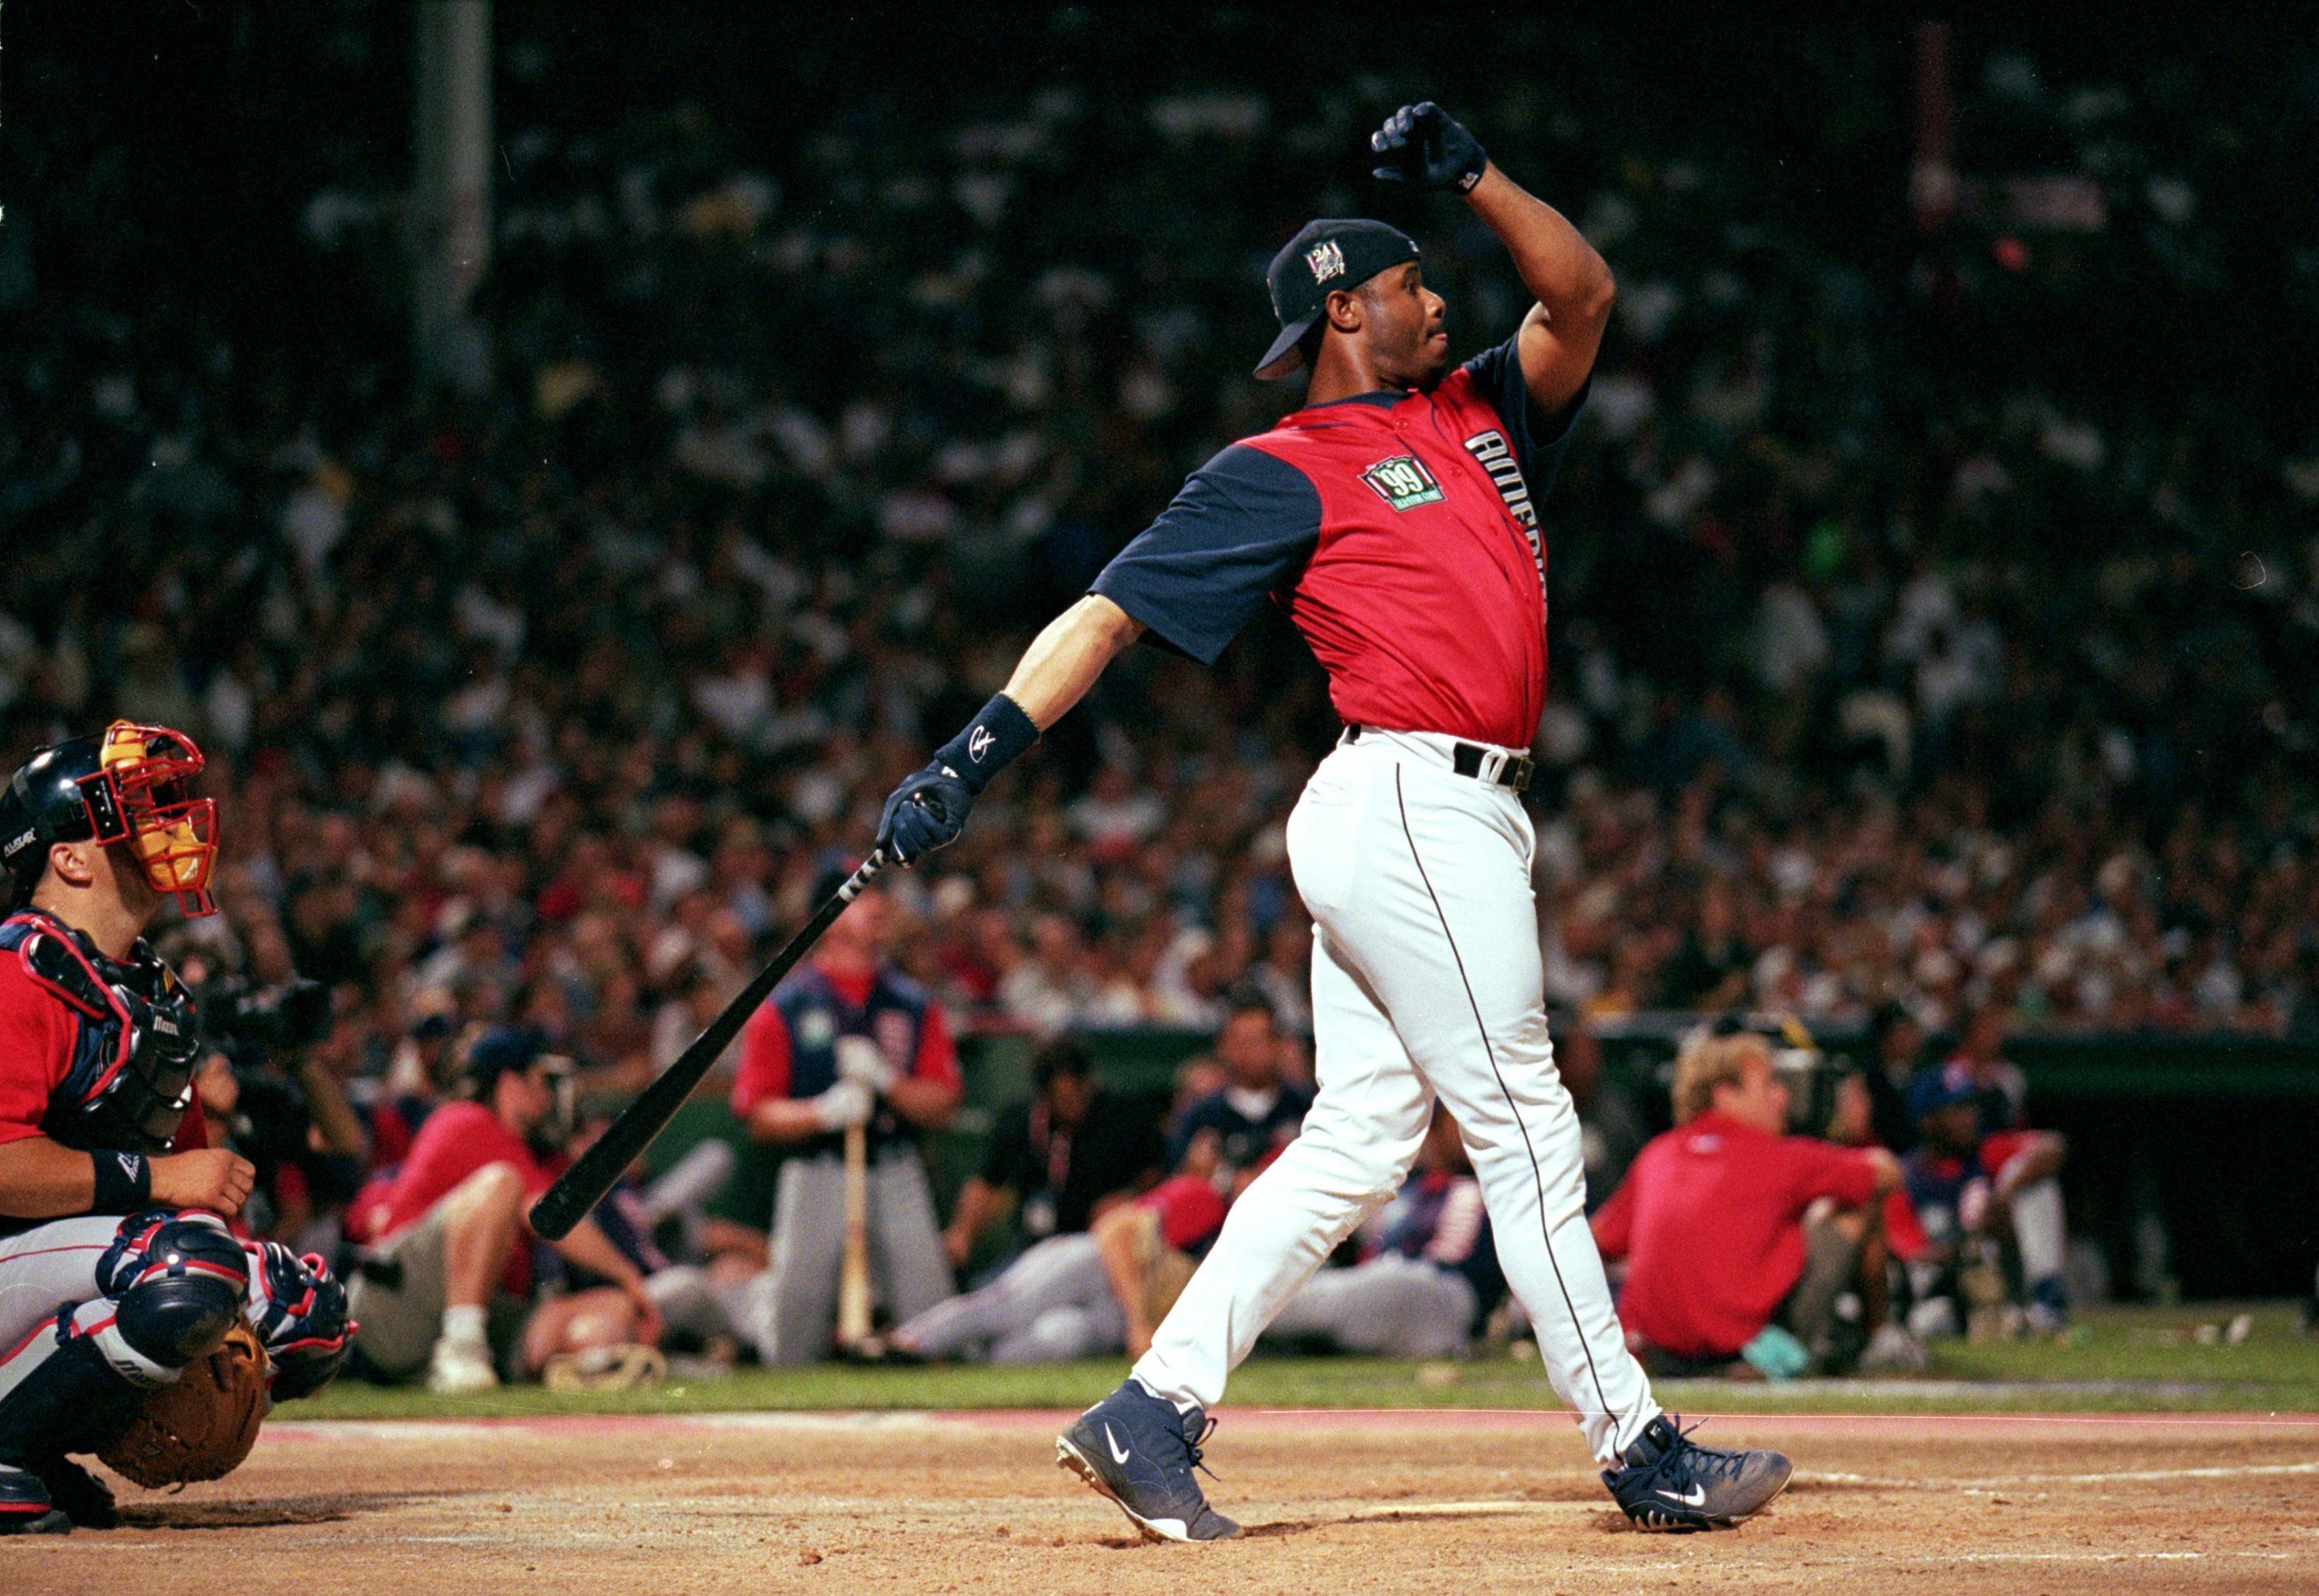 Team USA players watch in awe as MLB-great Ken Griffey Jr. takes